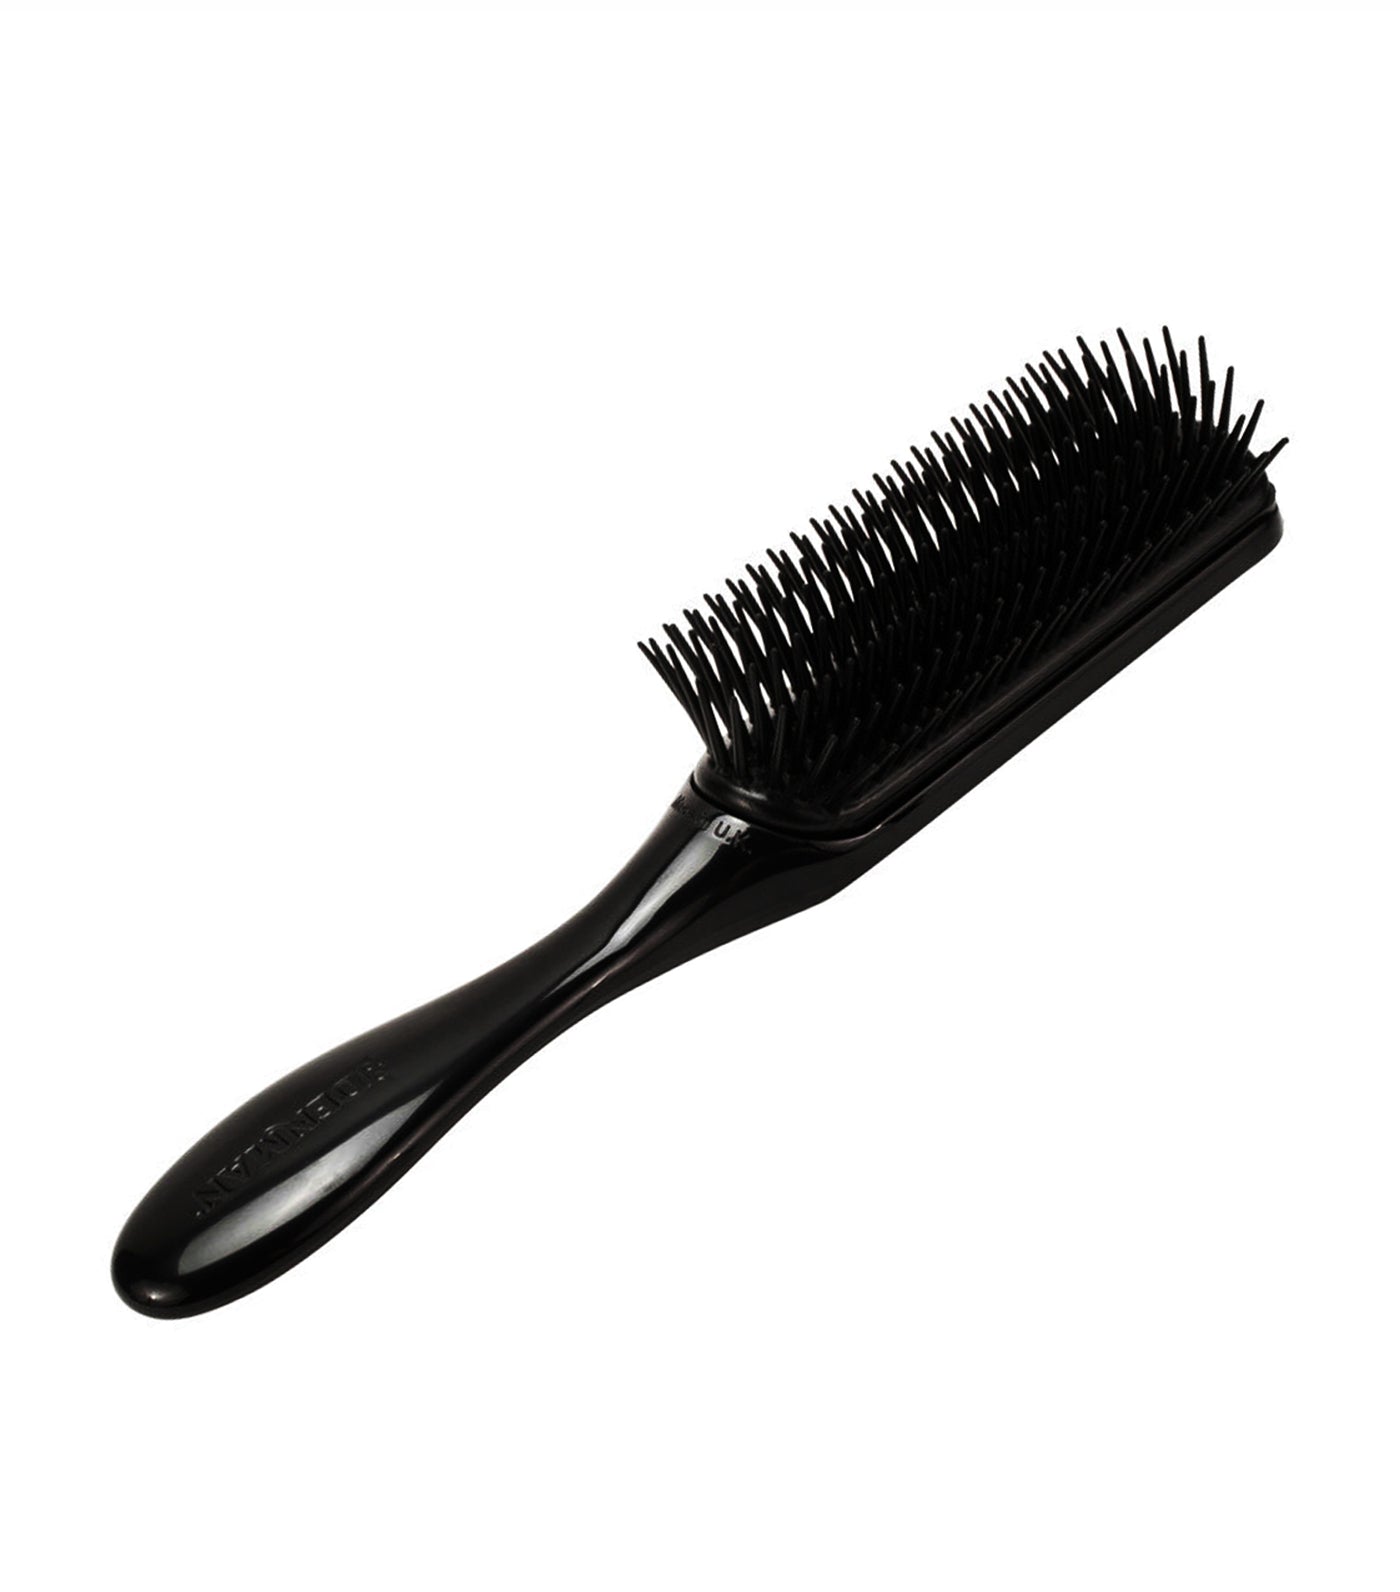 denman d-33 easy care small extra soft styling brush